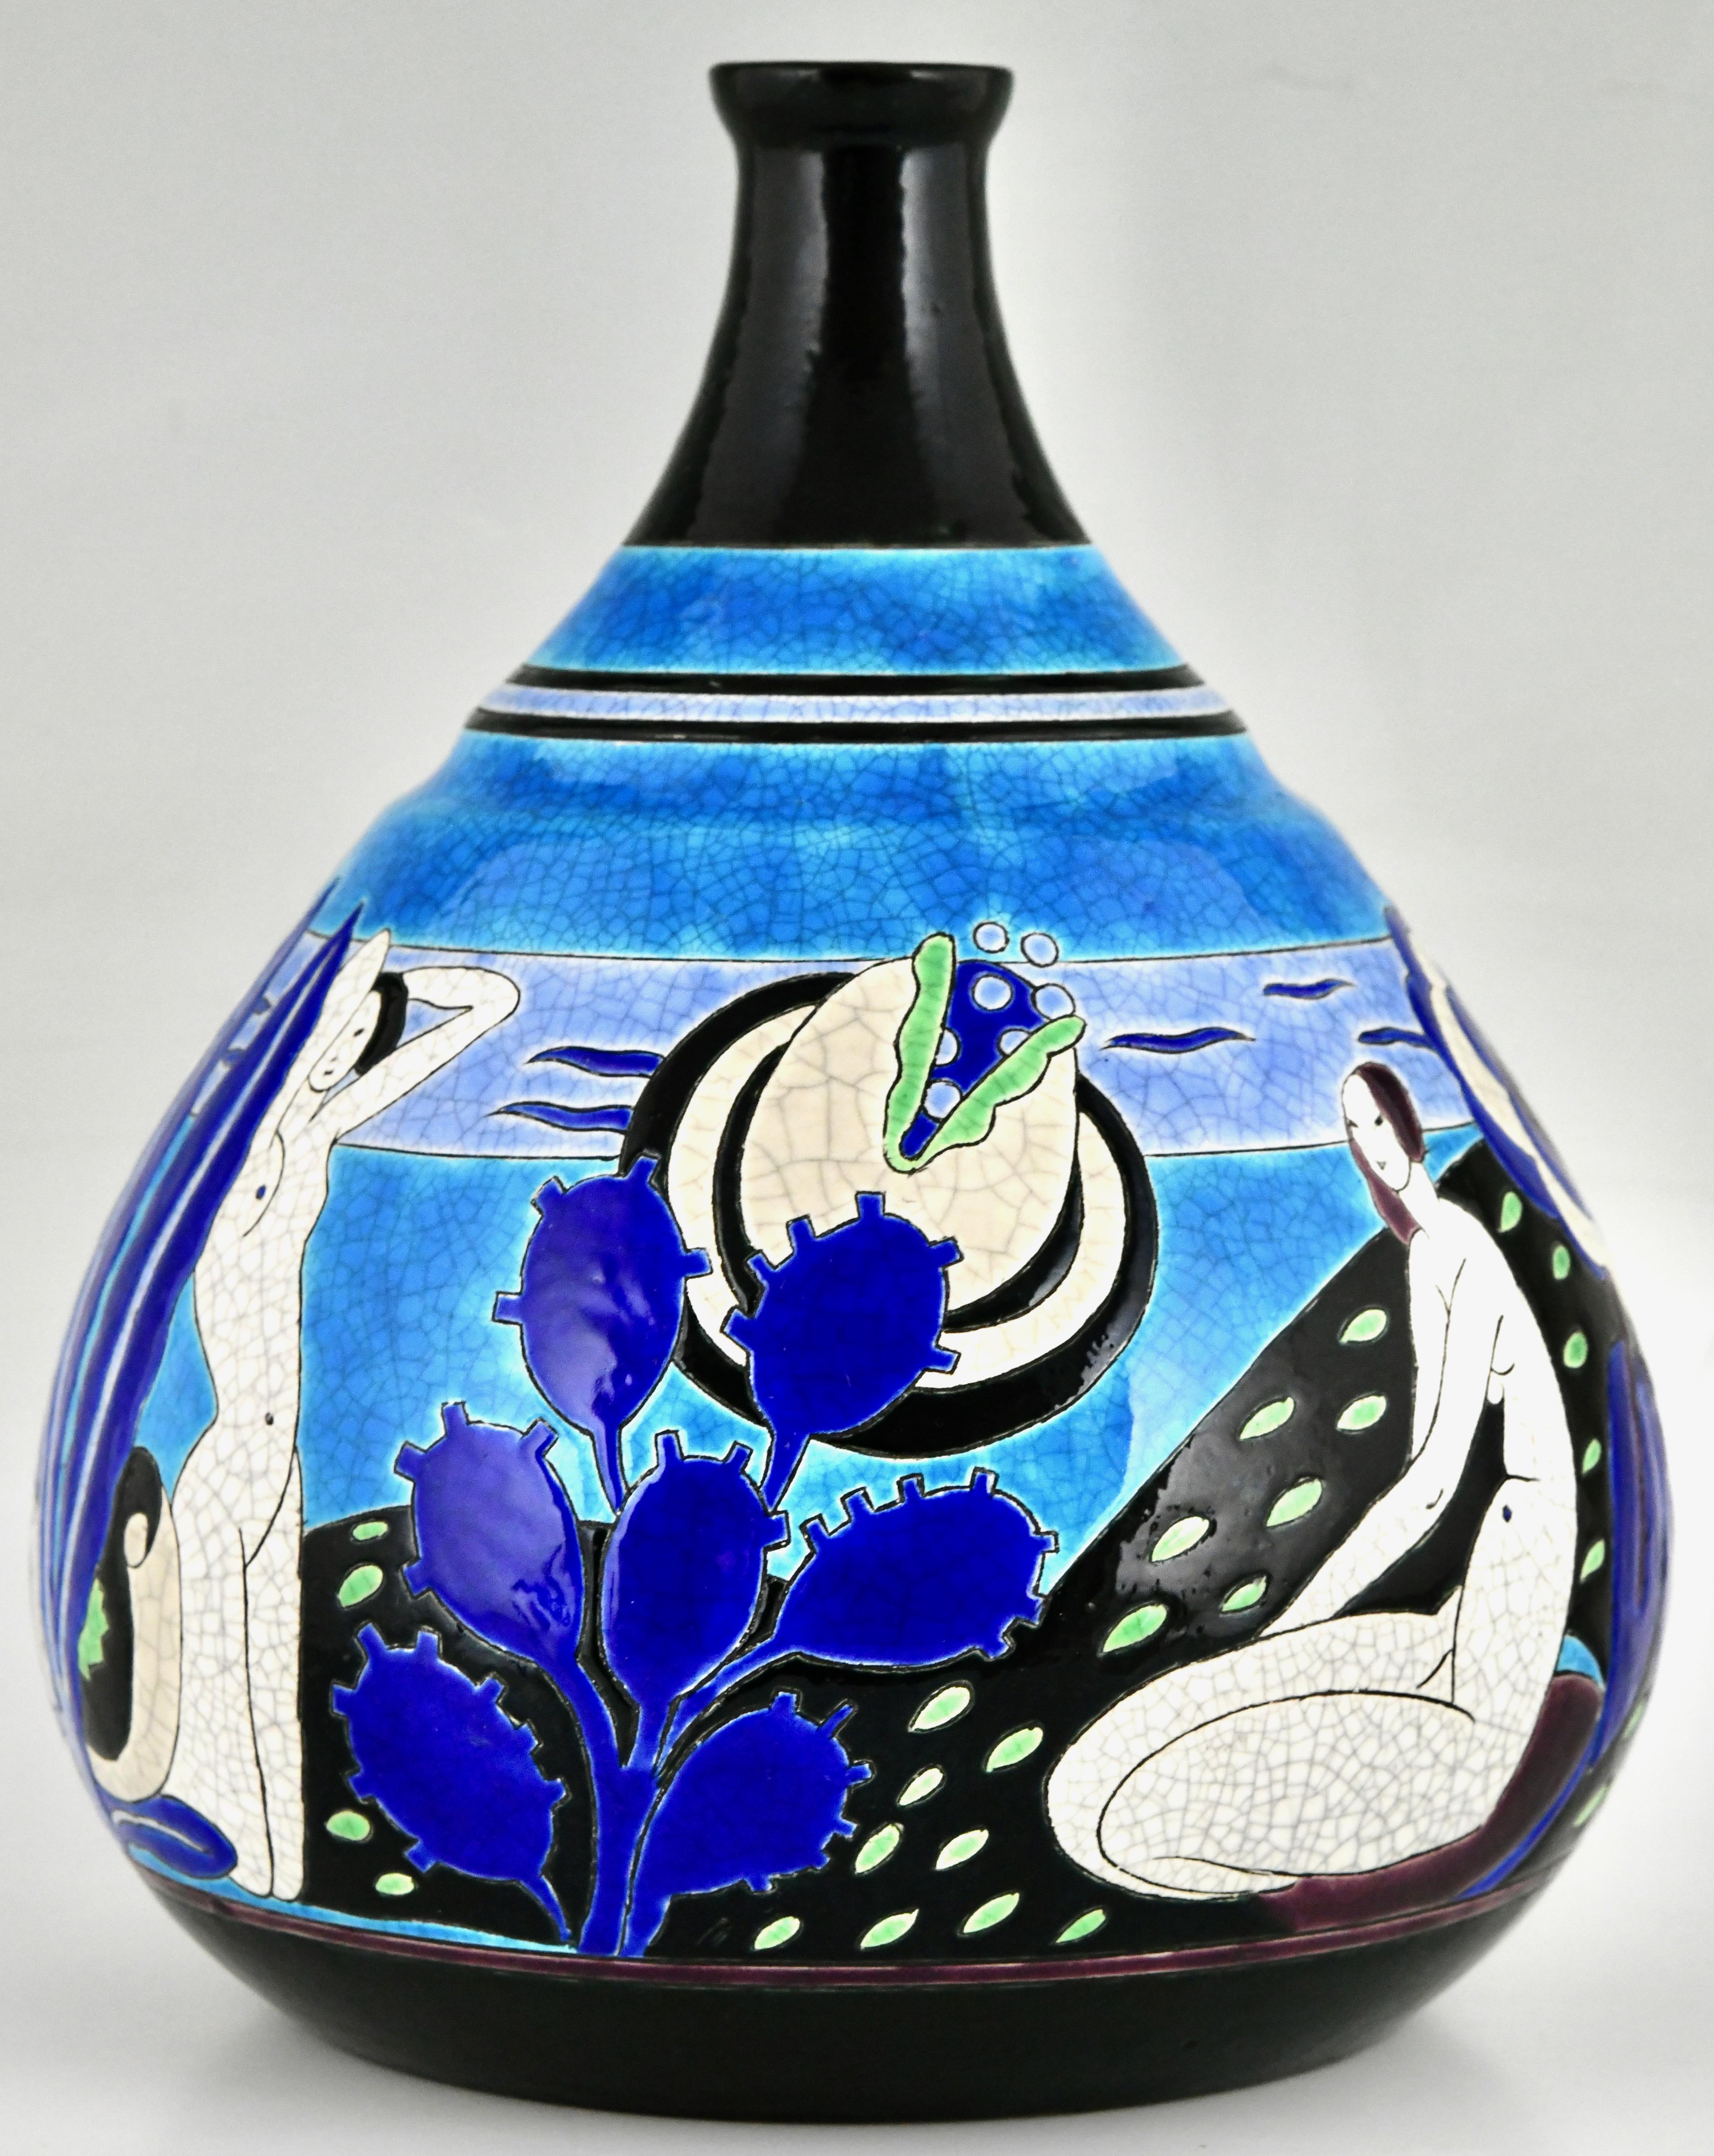 Art Deco ceramic vase with bathing nudes Baigneuses. 
Longwy Primavera Art Deco vase with nudes in a landscape in shades of blue, black, green and white.
Marked Primavera, Longwy, France 1925. 
This French Art Deco vase was made by Longwy for